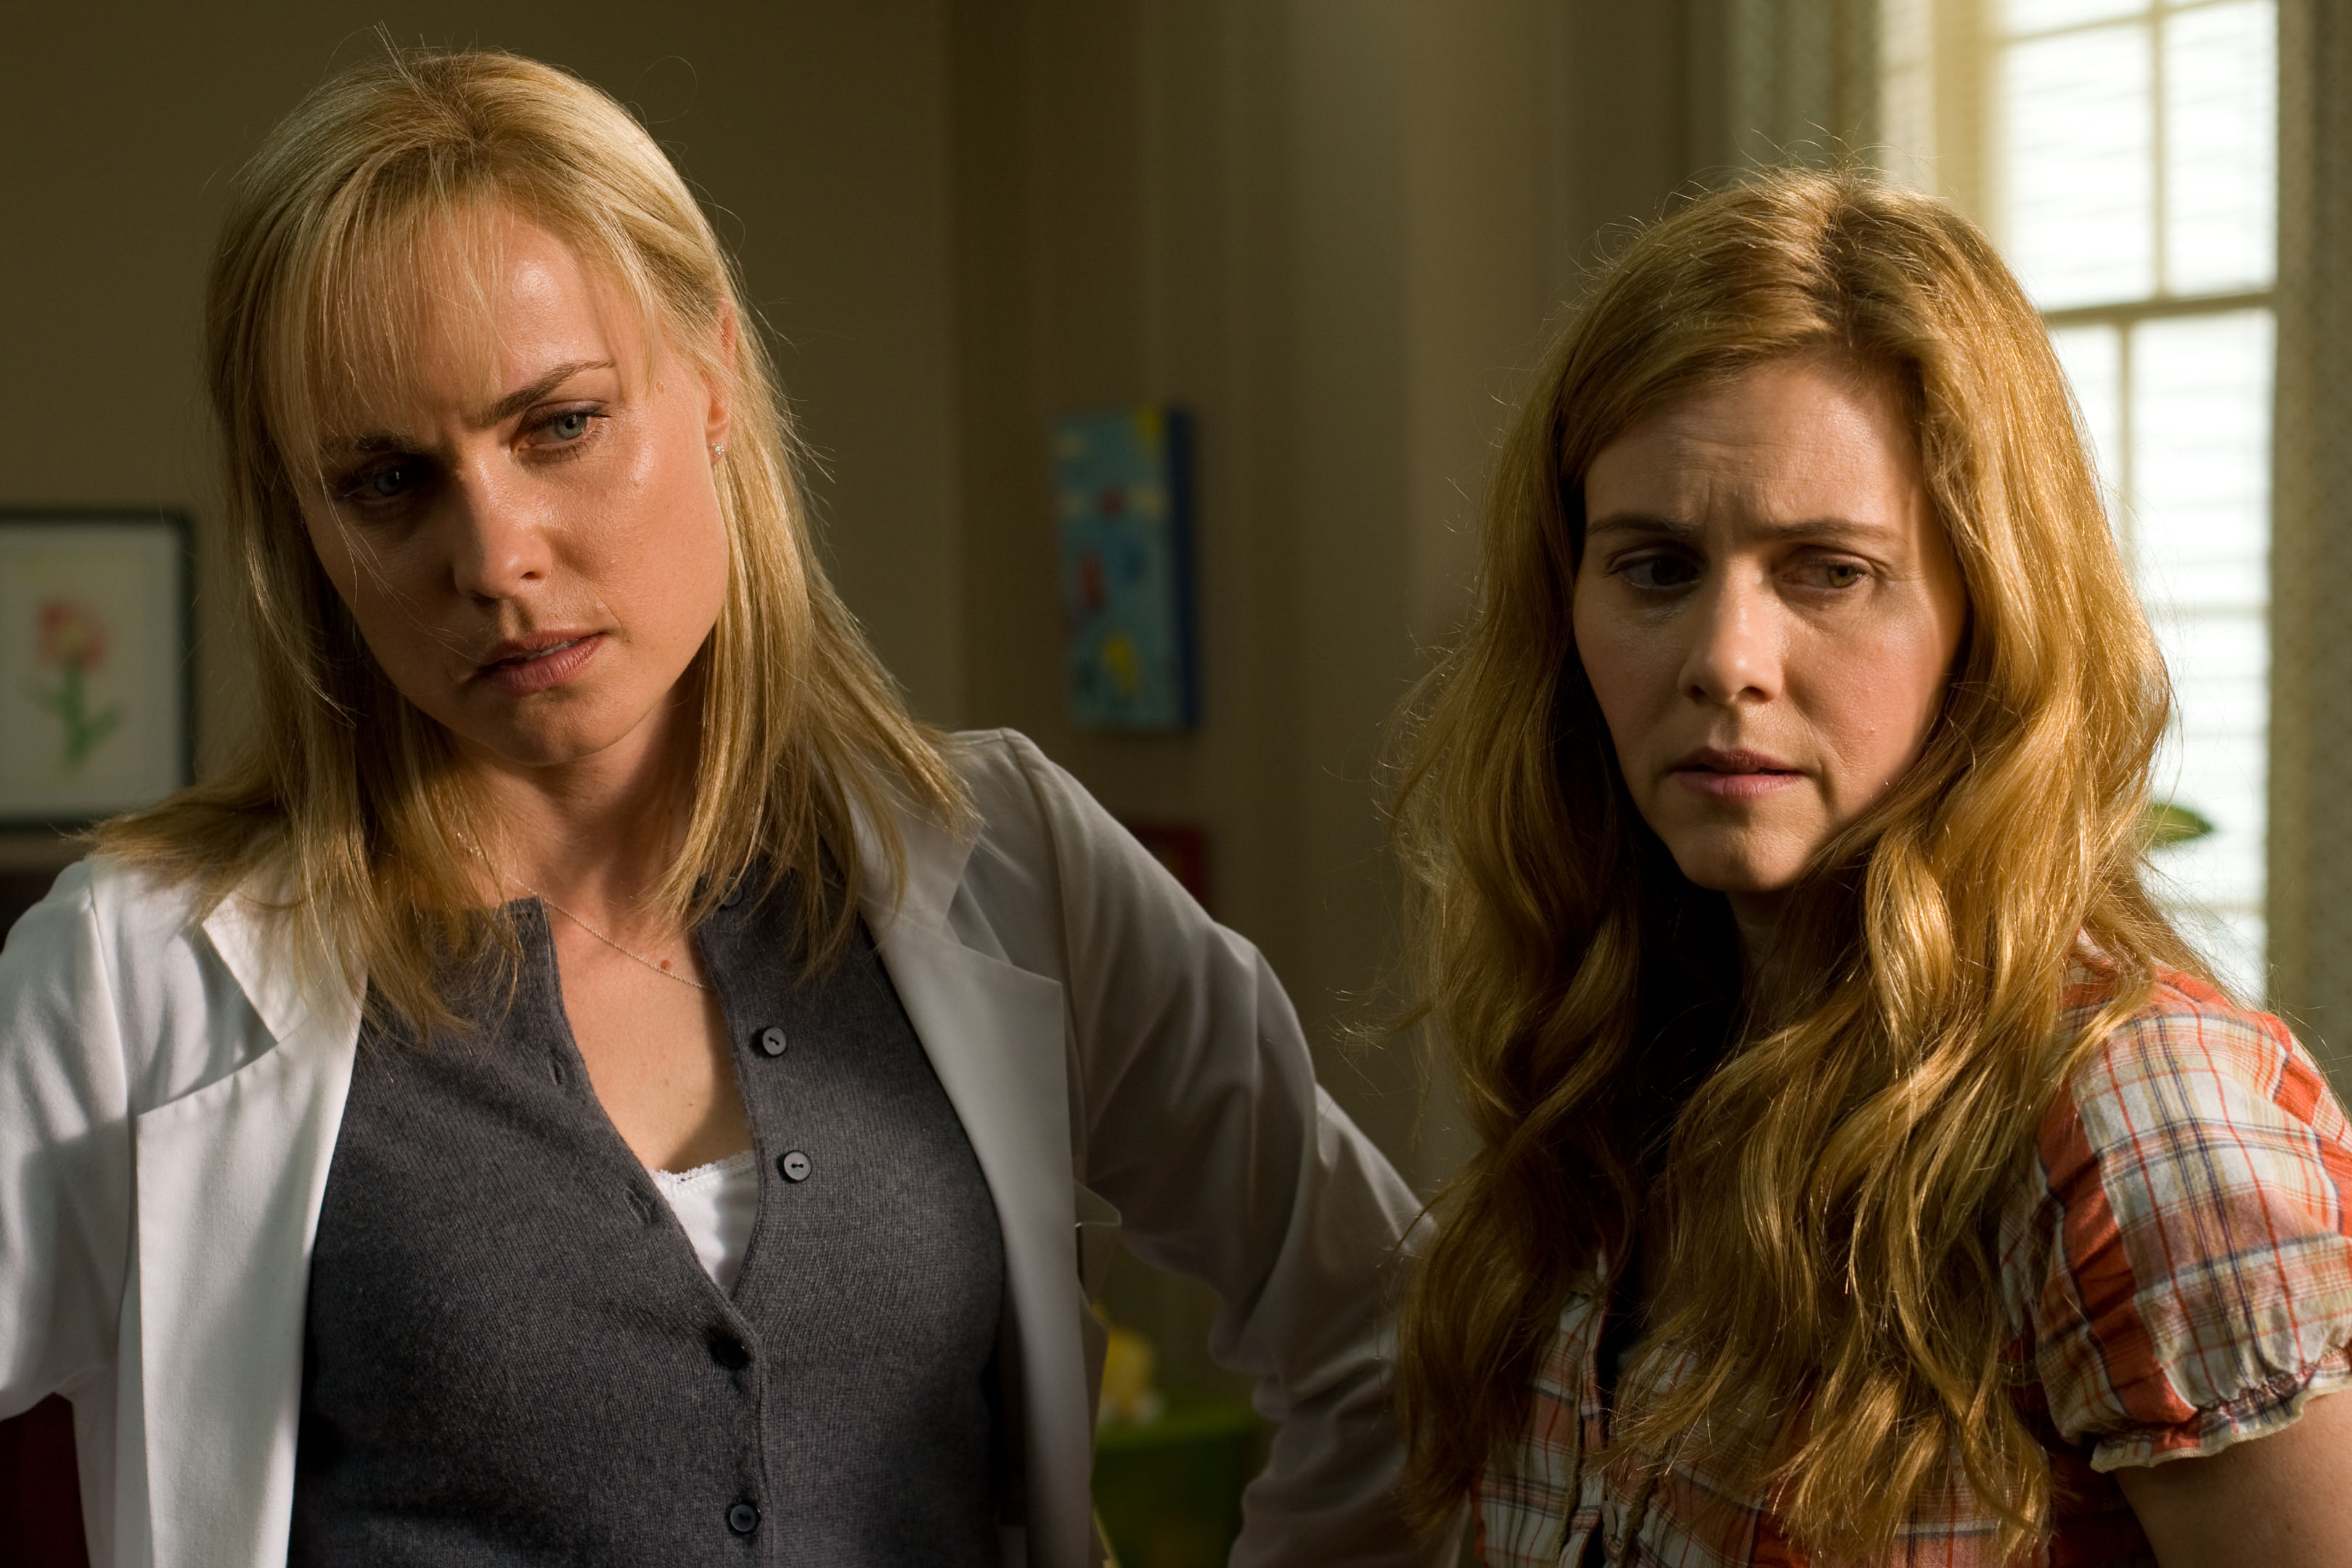 Radha Mitchell and Christie Lynn Smith in The Crazies (2010)